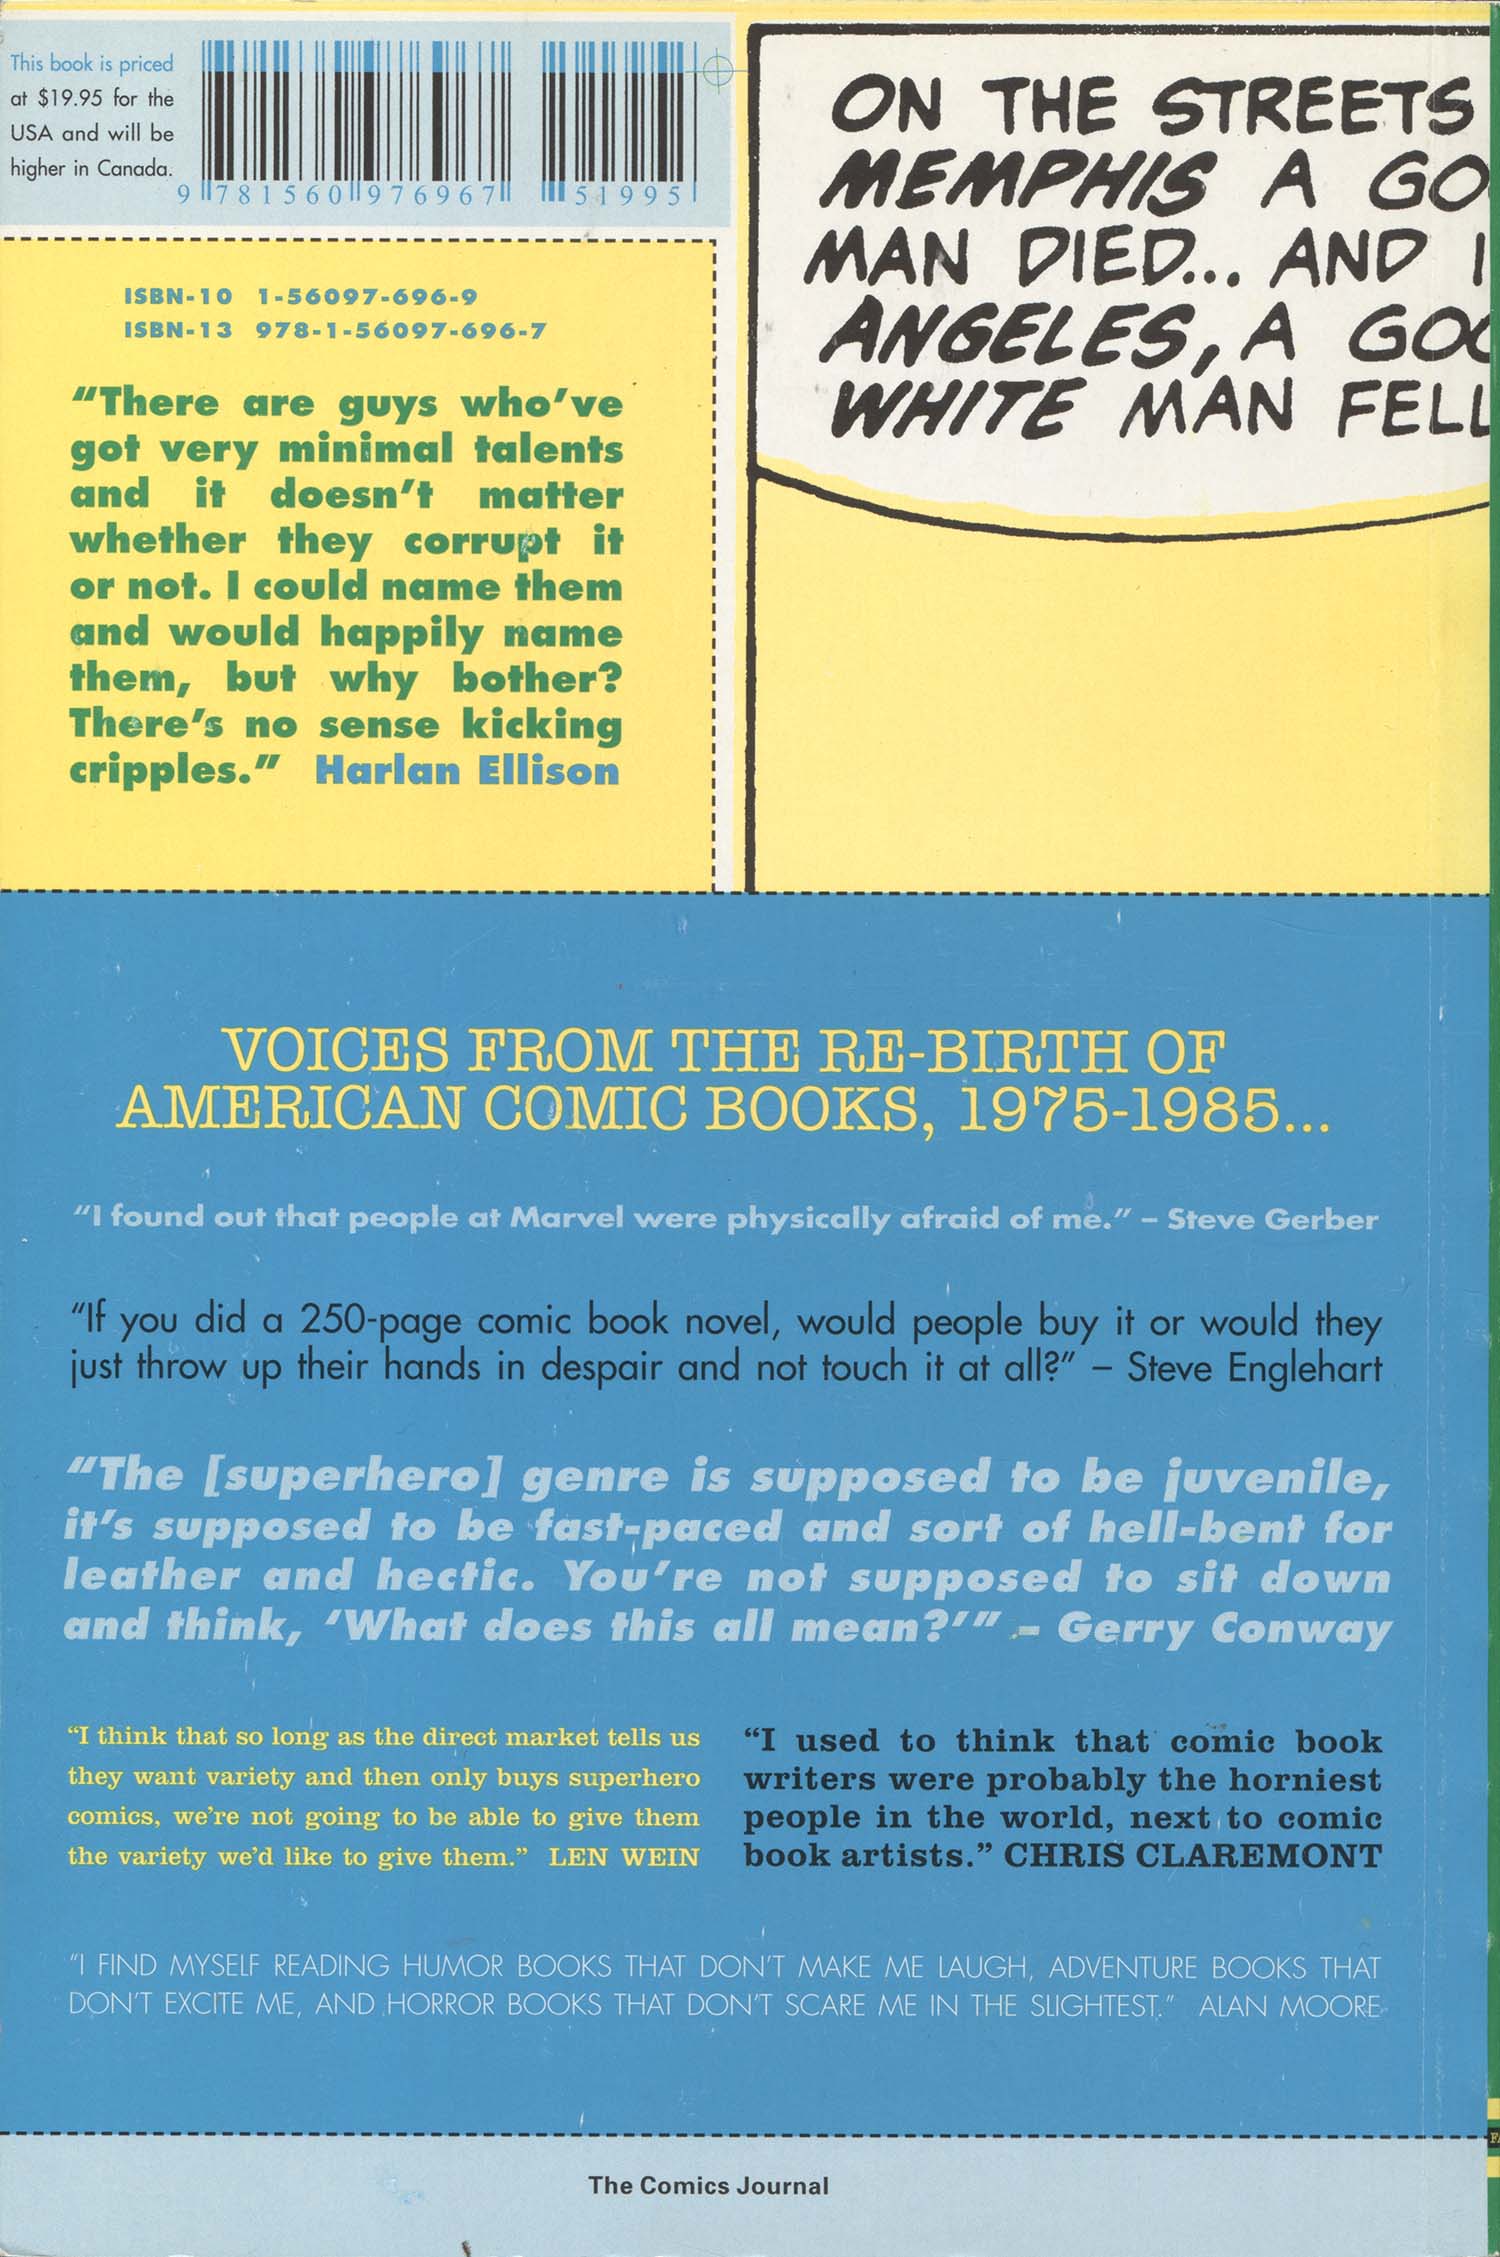 The Comics Journal Library 6: The Writers, back cover